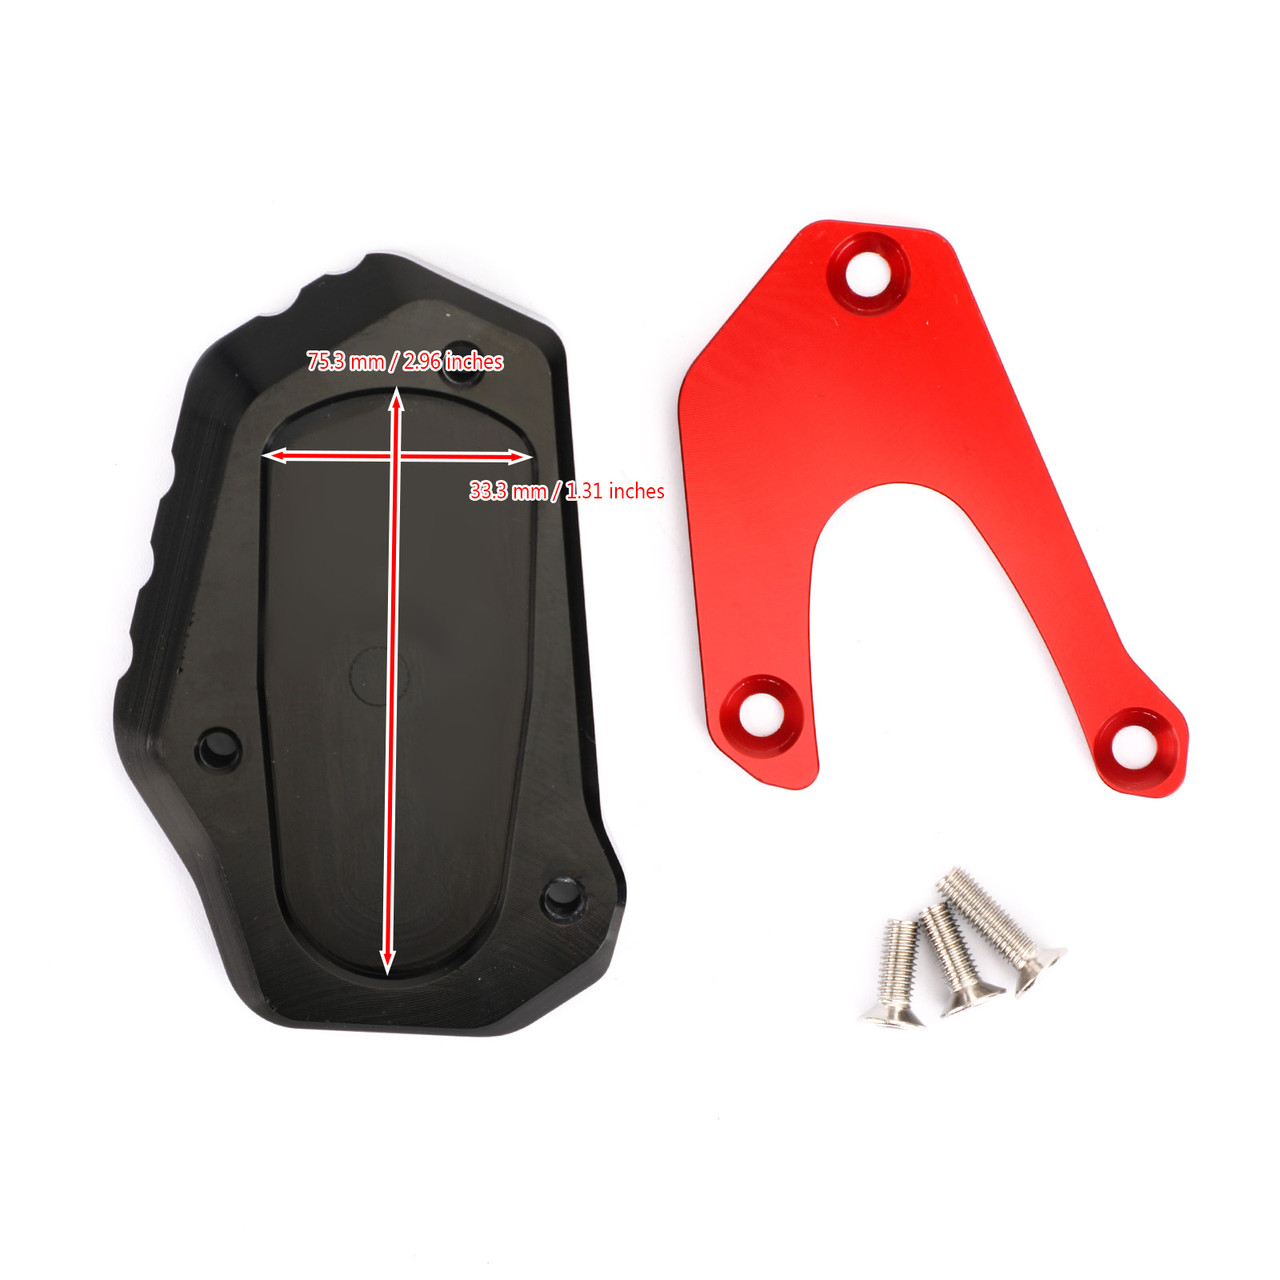 Kickstand Side Stand Extension Pad Fit For Suzuki V-Strom 1050A XT 2020 Red